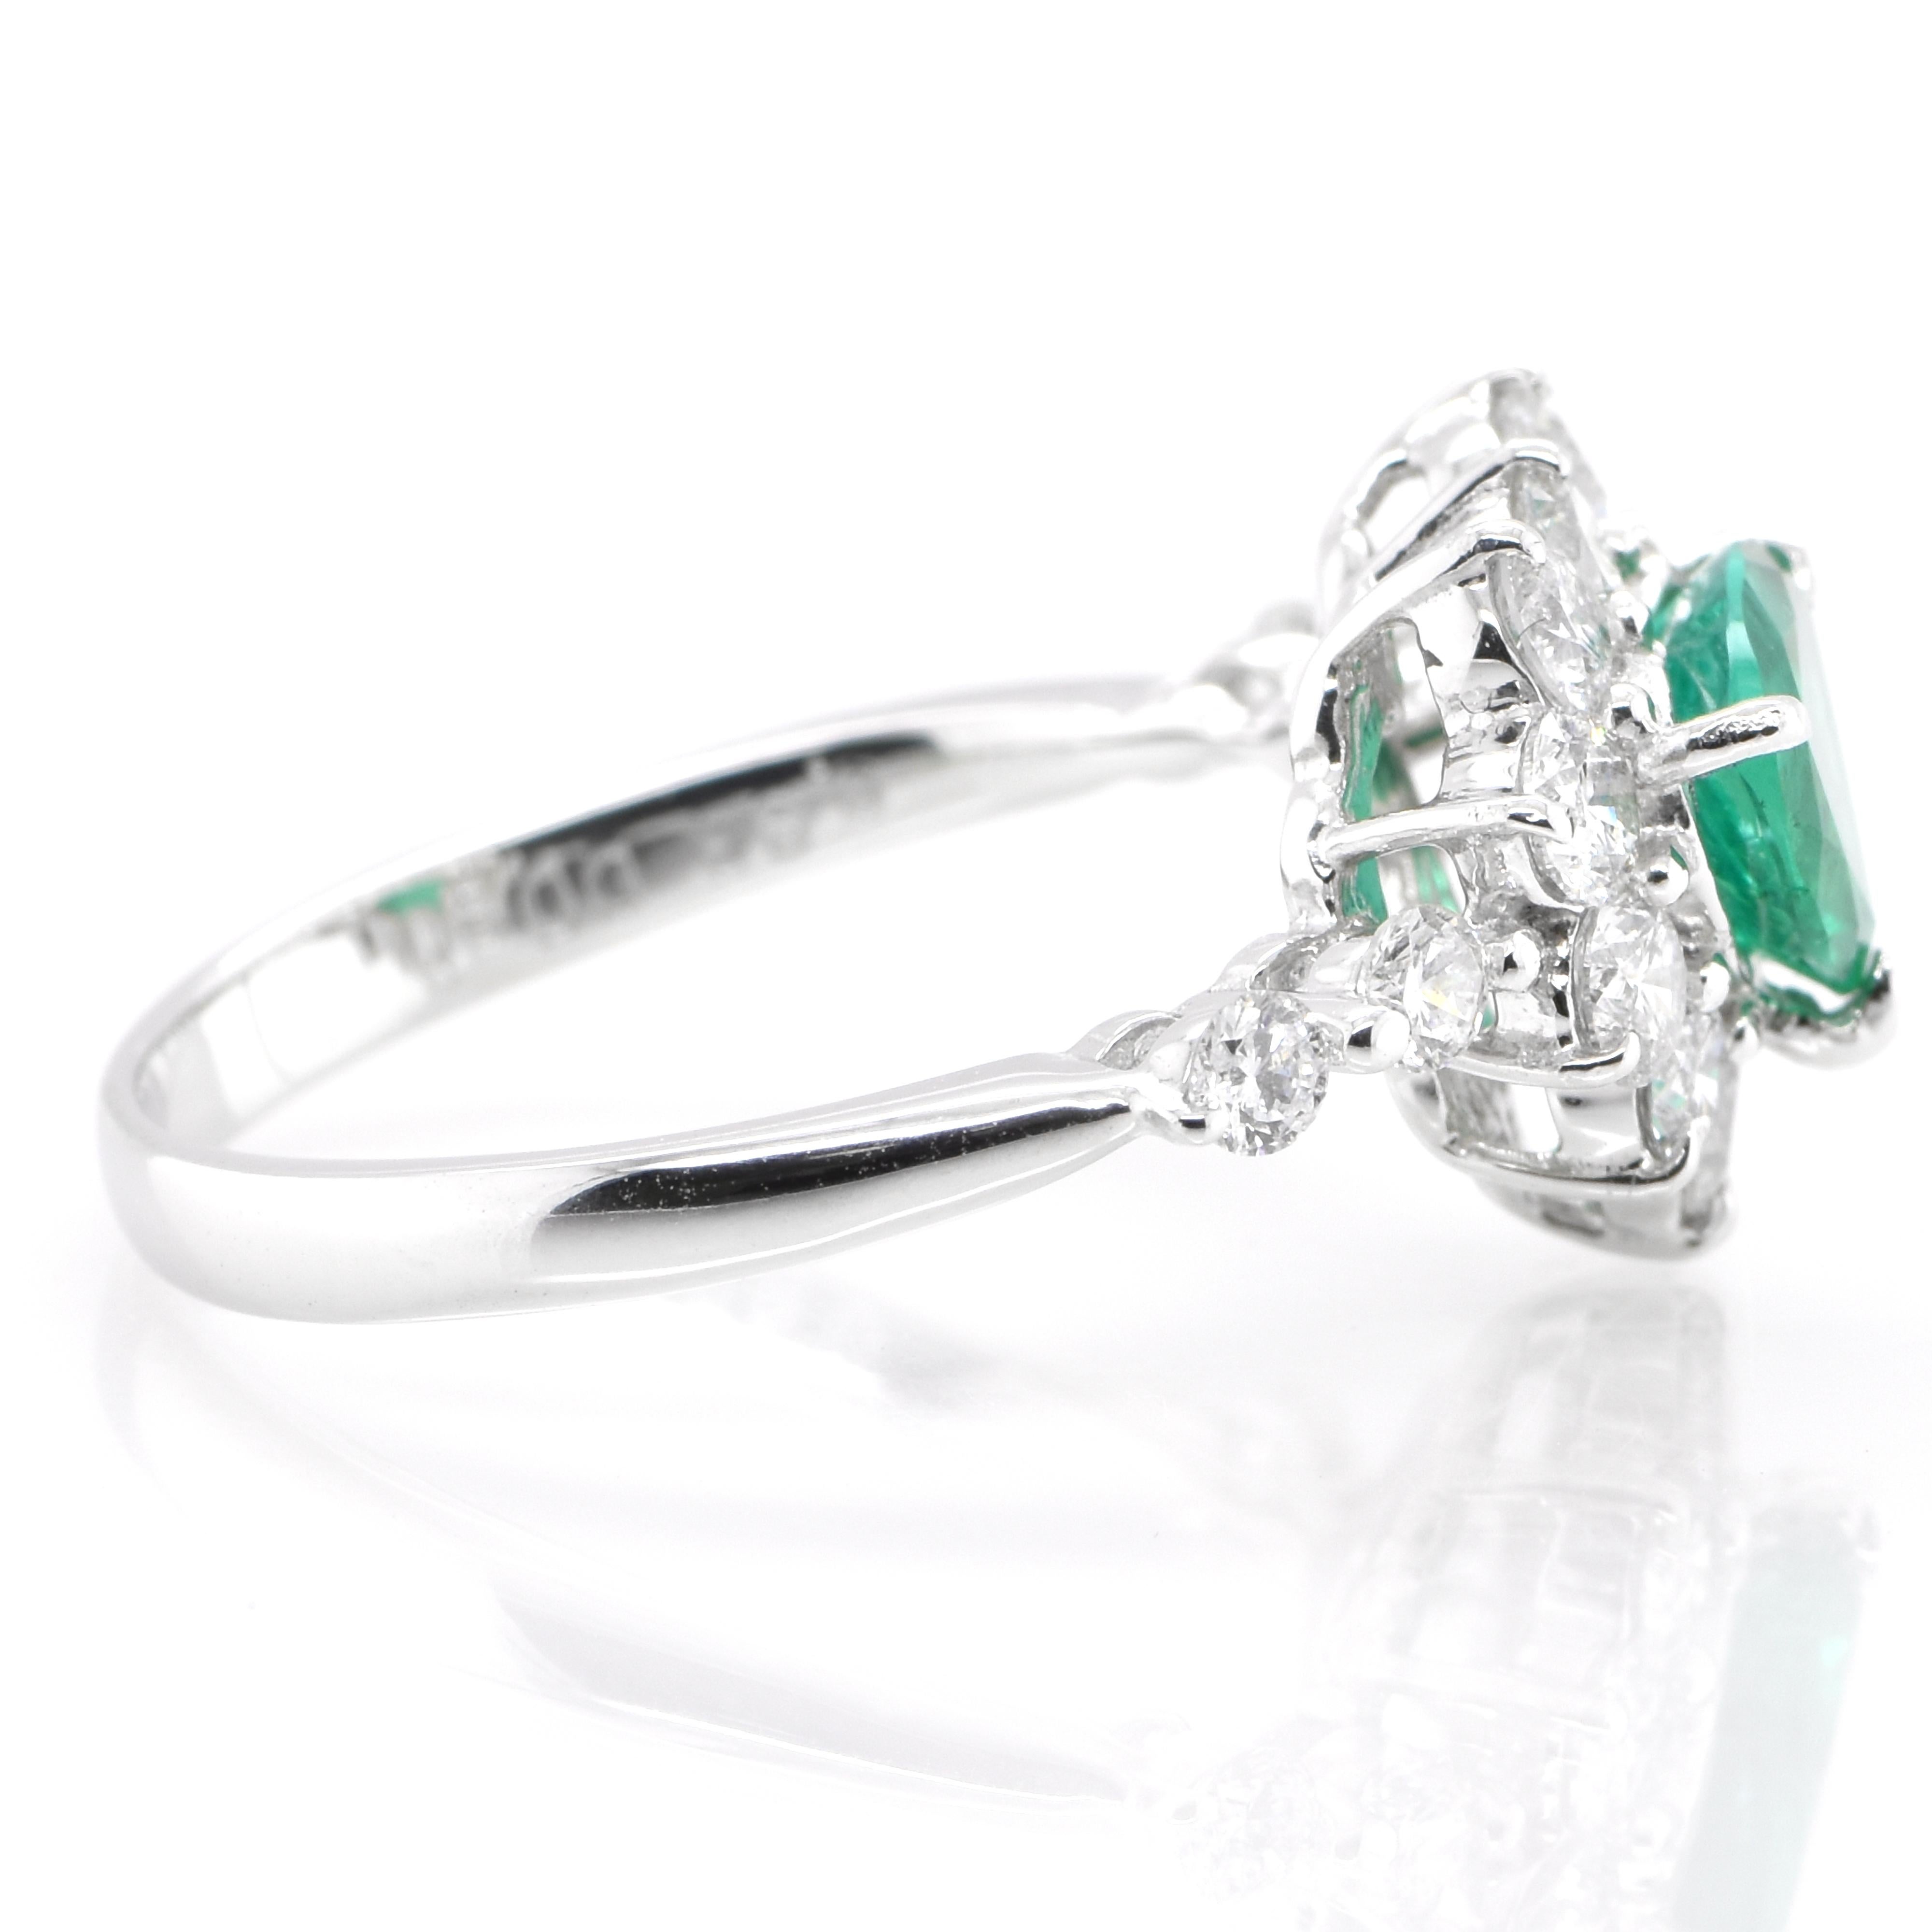 Women's  0.83 Carat Natural, Trillion Cut Emerald and Diamond Ring Set in Platinum For Sale